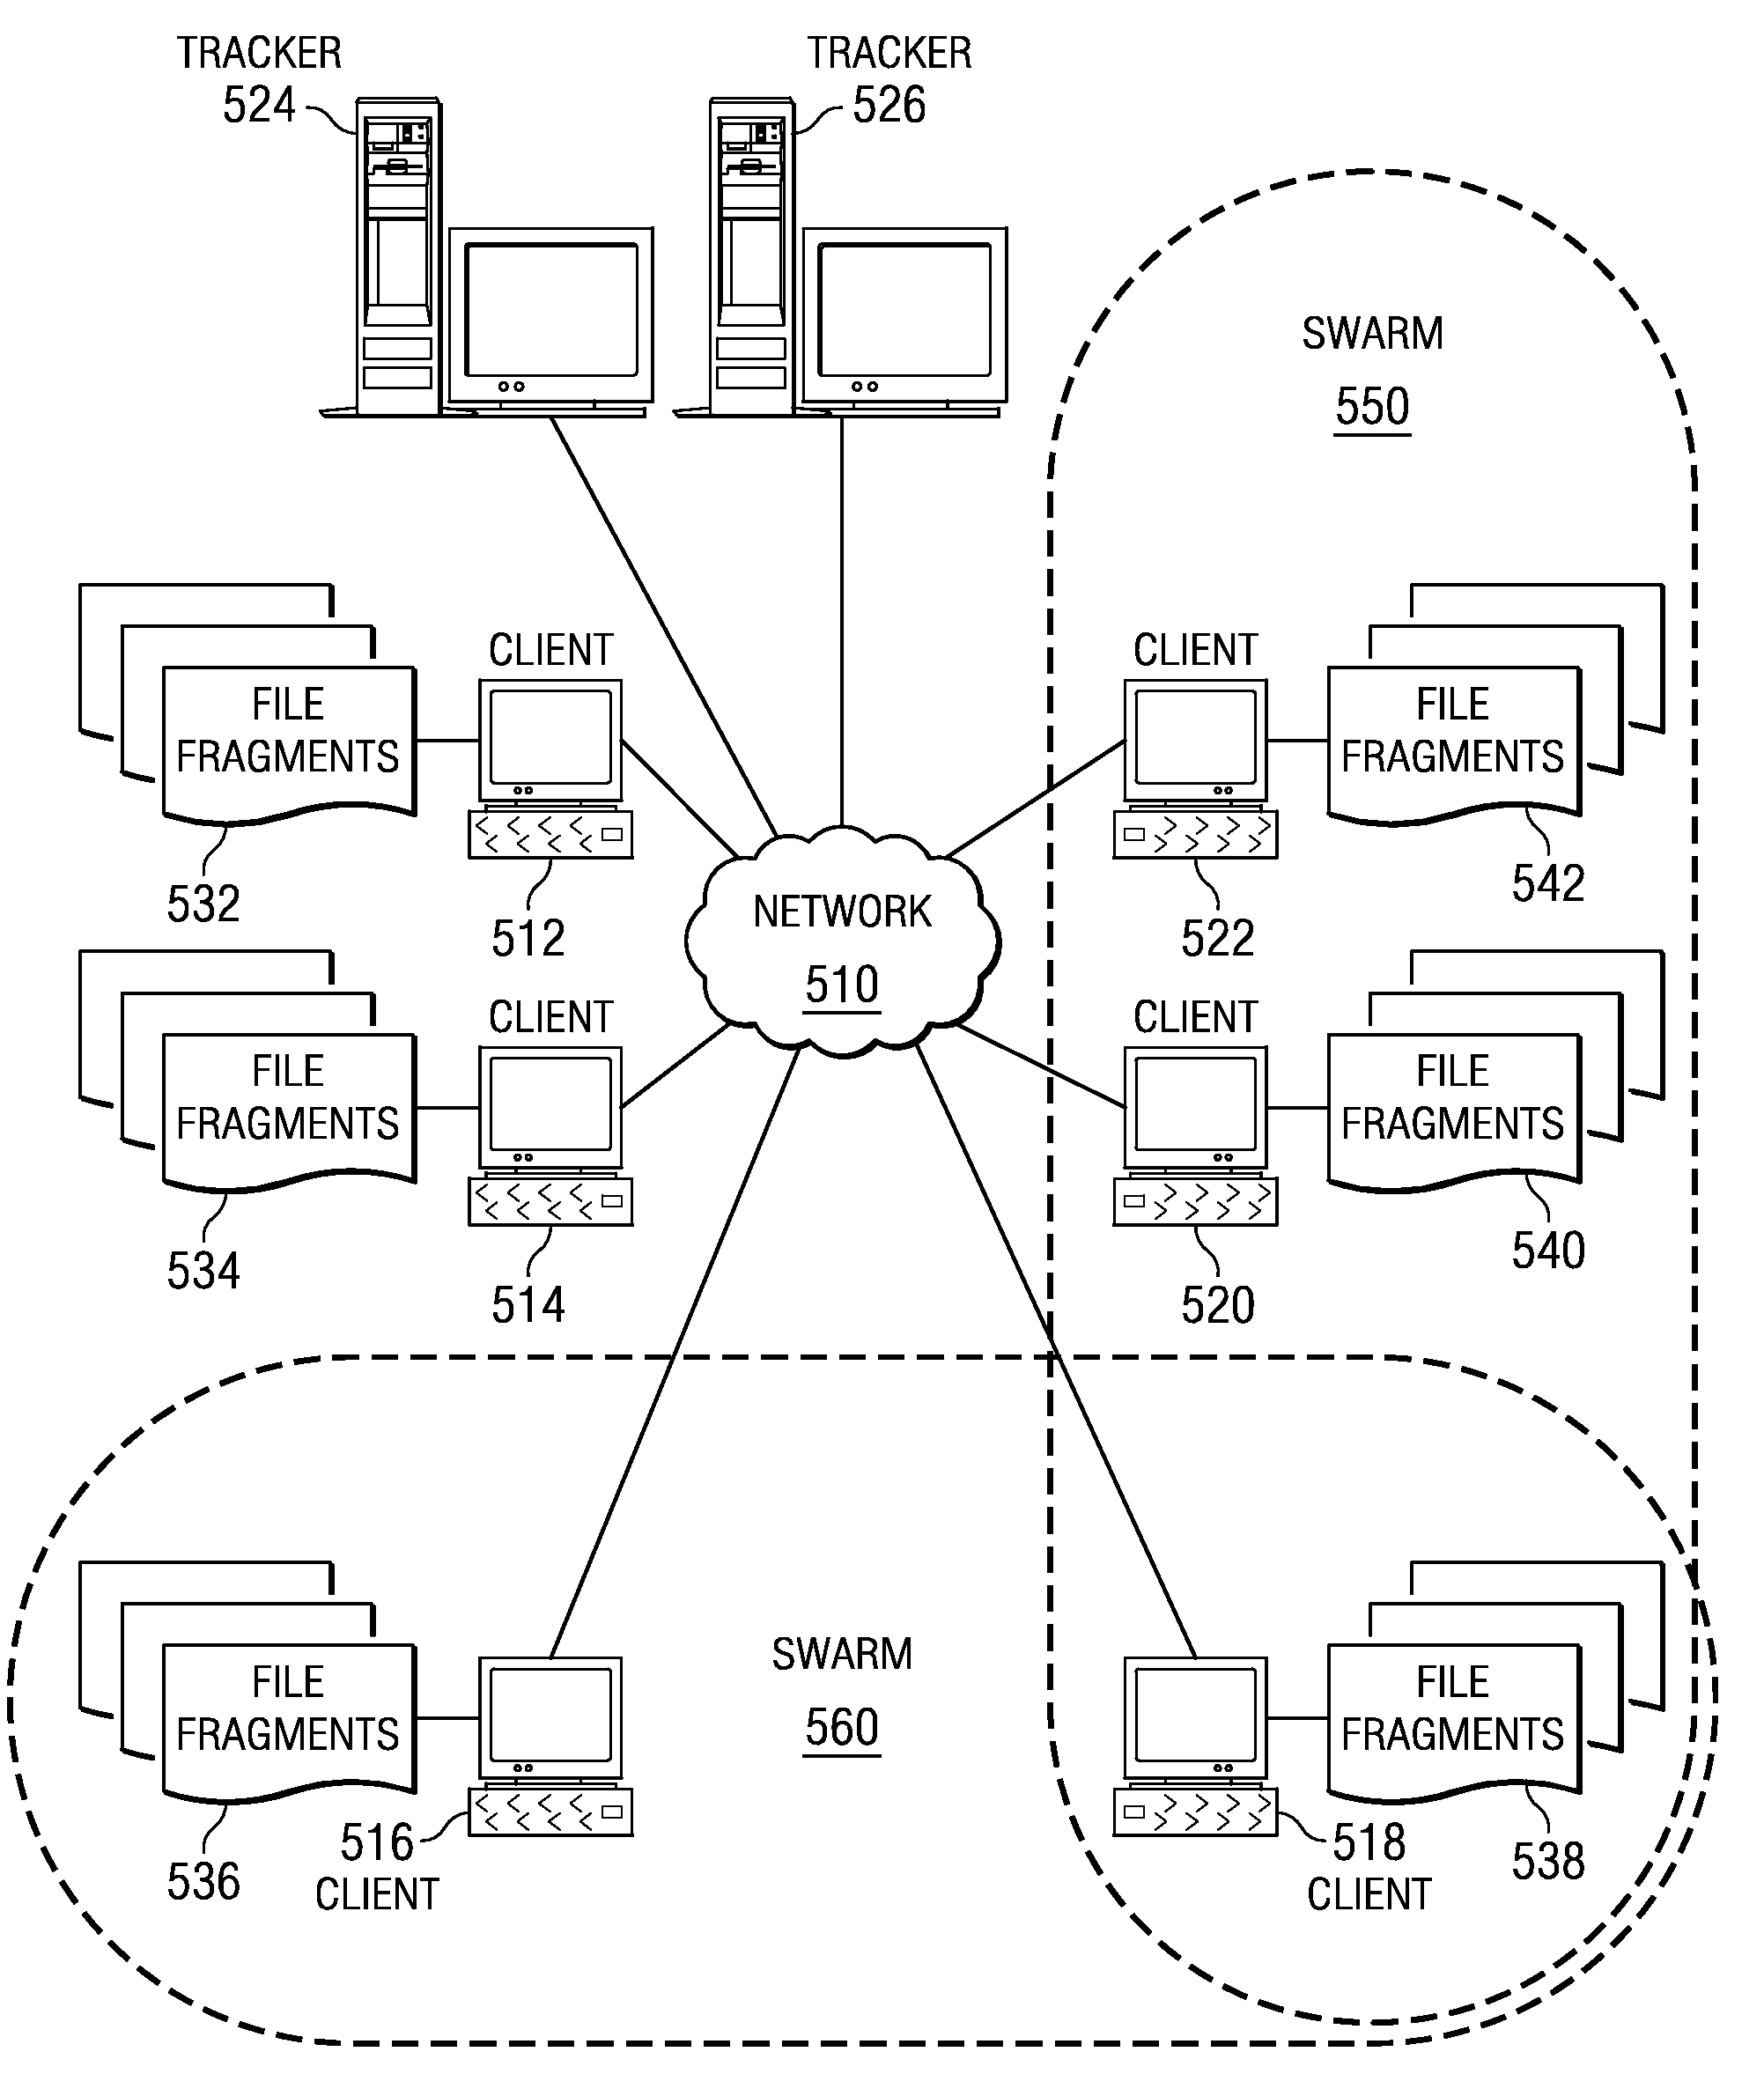 File fragment trading based on rarity values in a segmented file sharing system